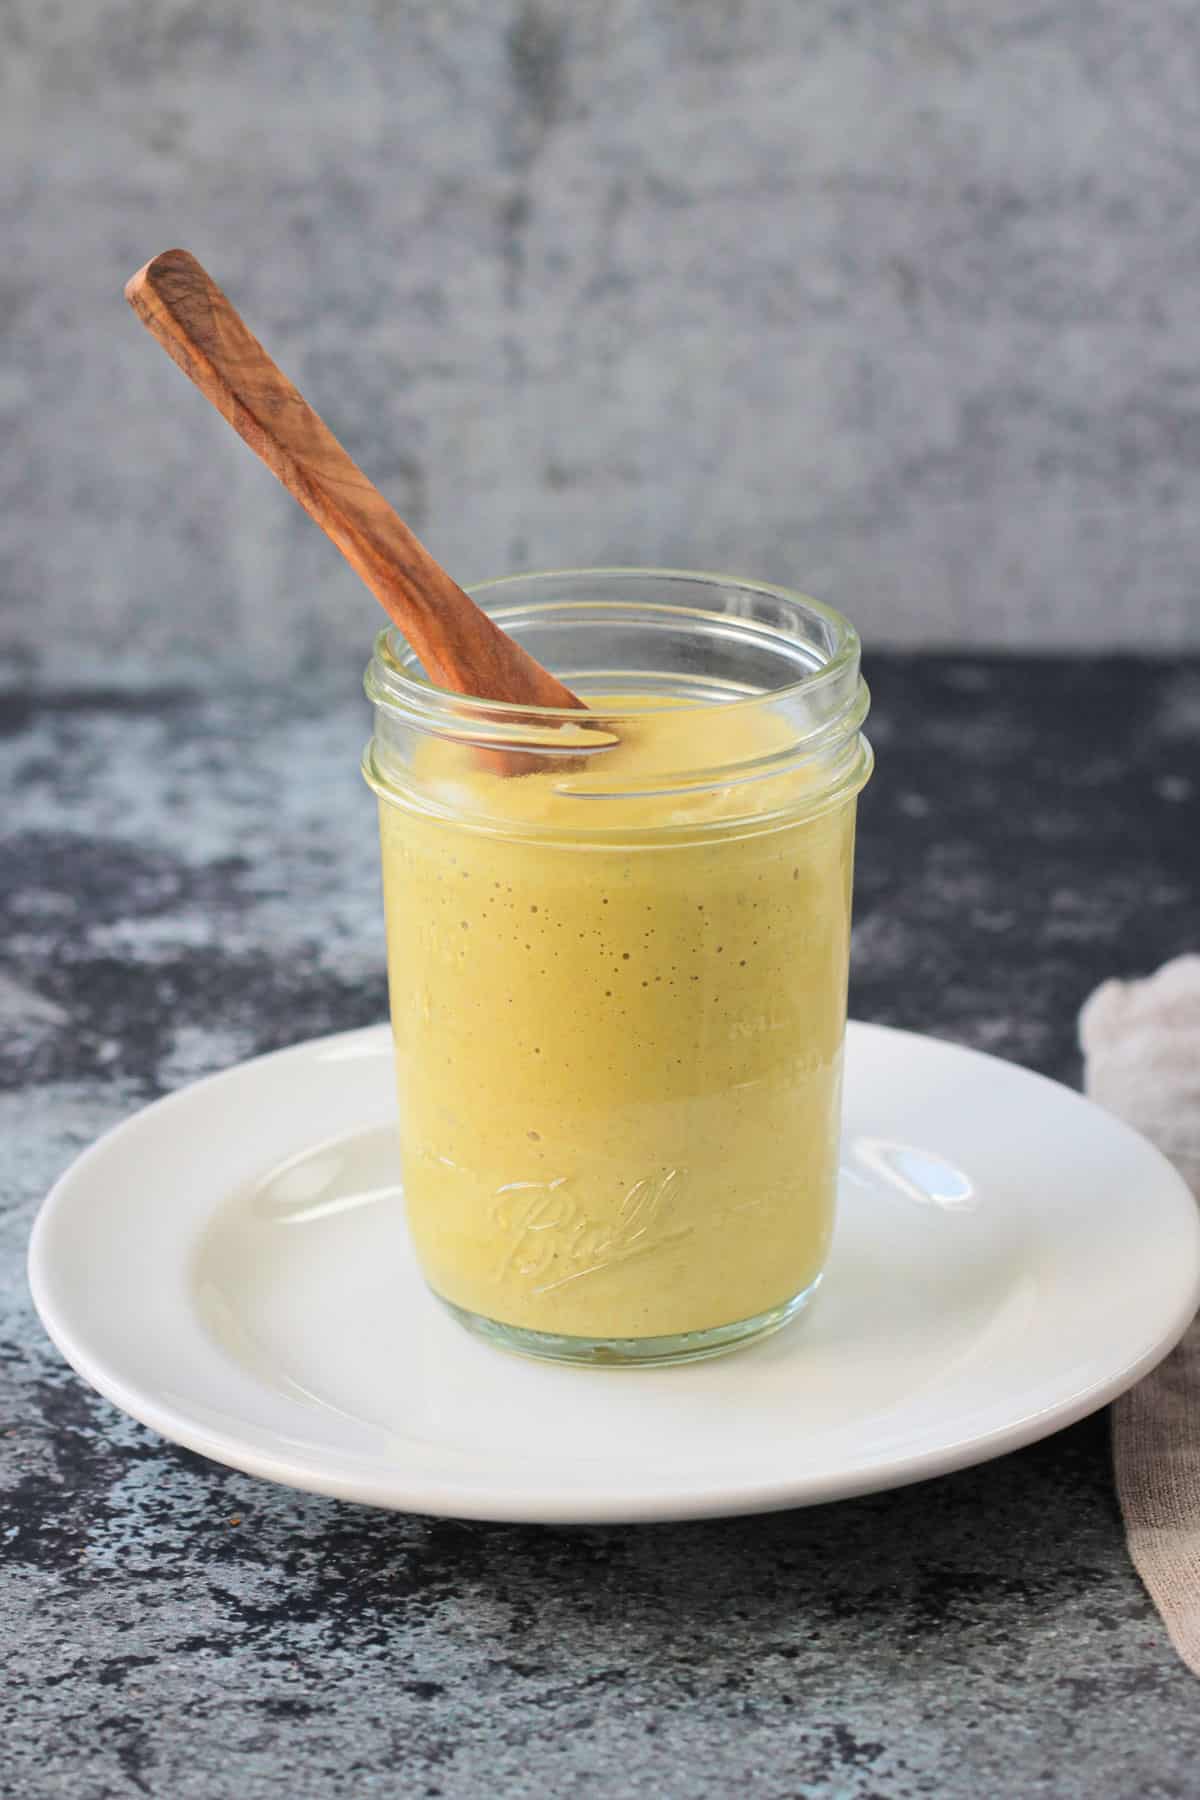 Cashew curry sauce in a glass jar with a wooden spoon.